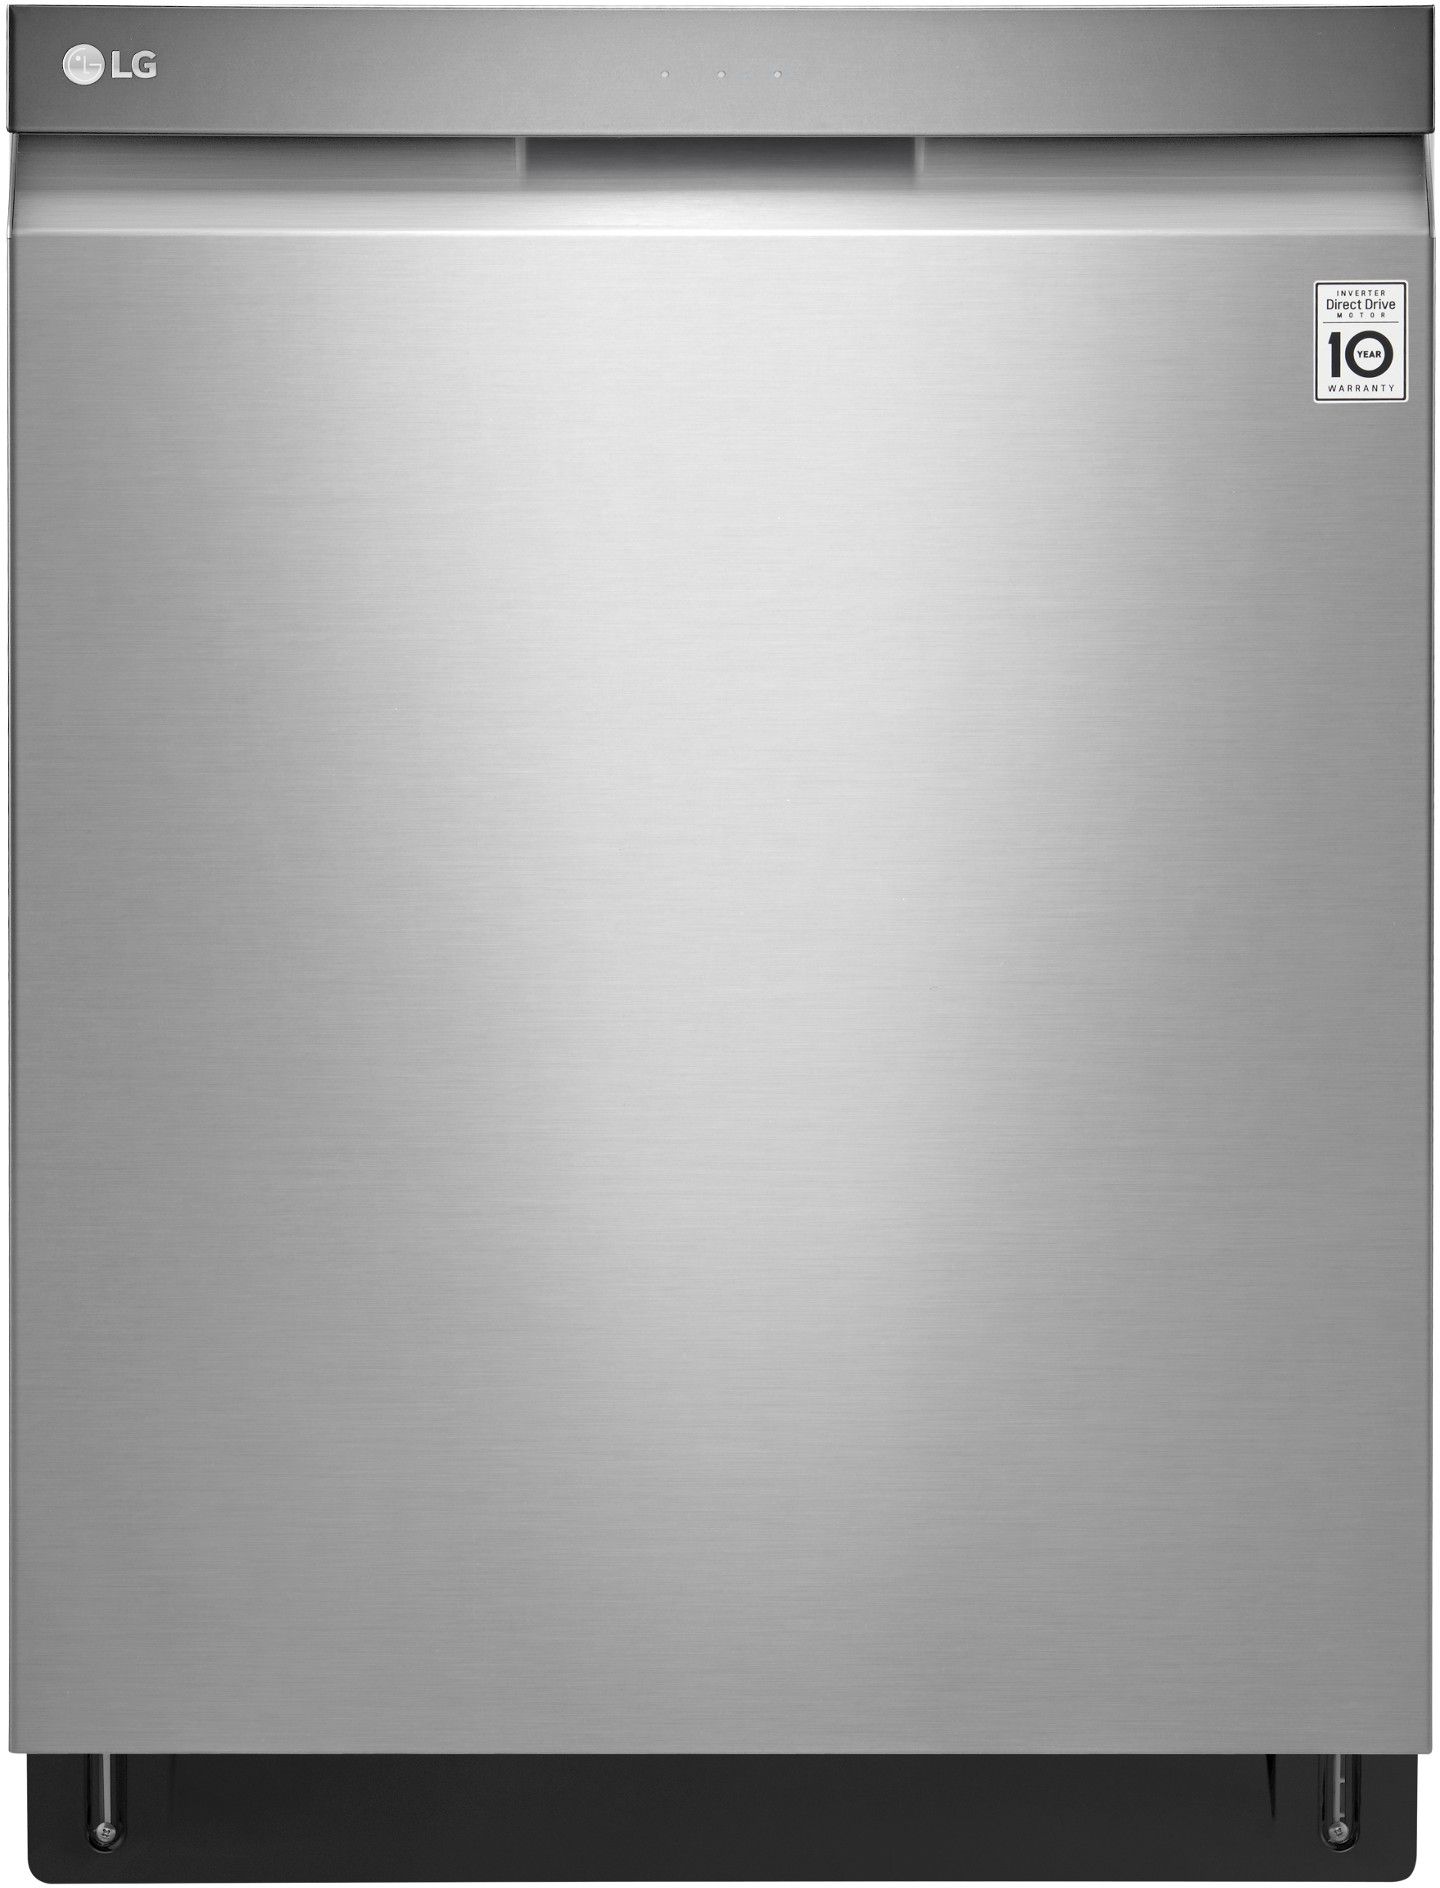 LG 24" Stainless Steel Built In Dishwasher